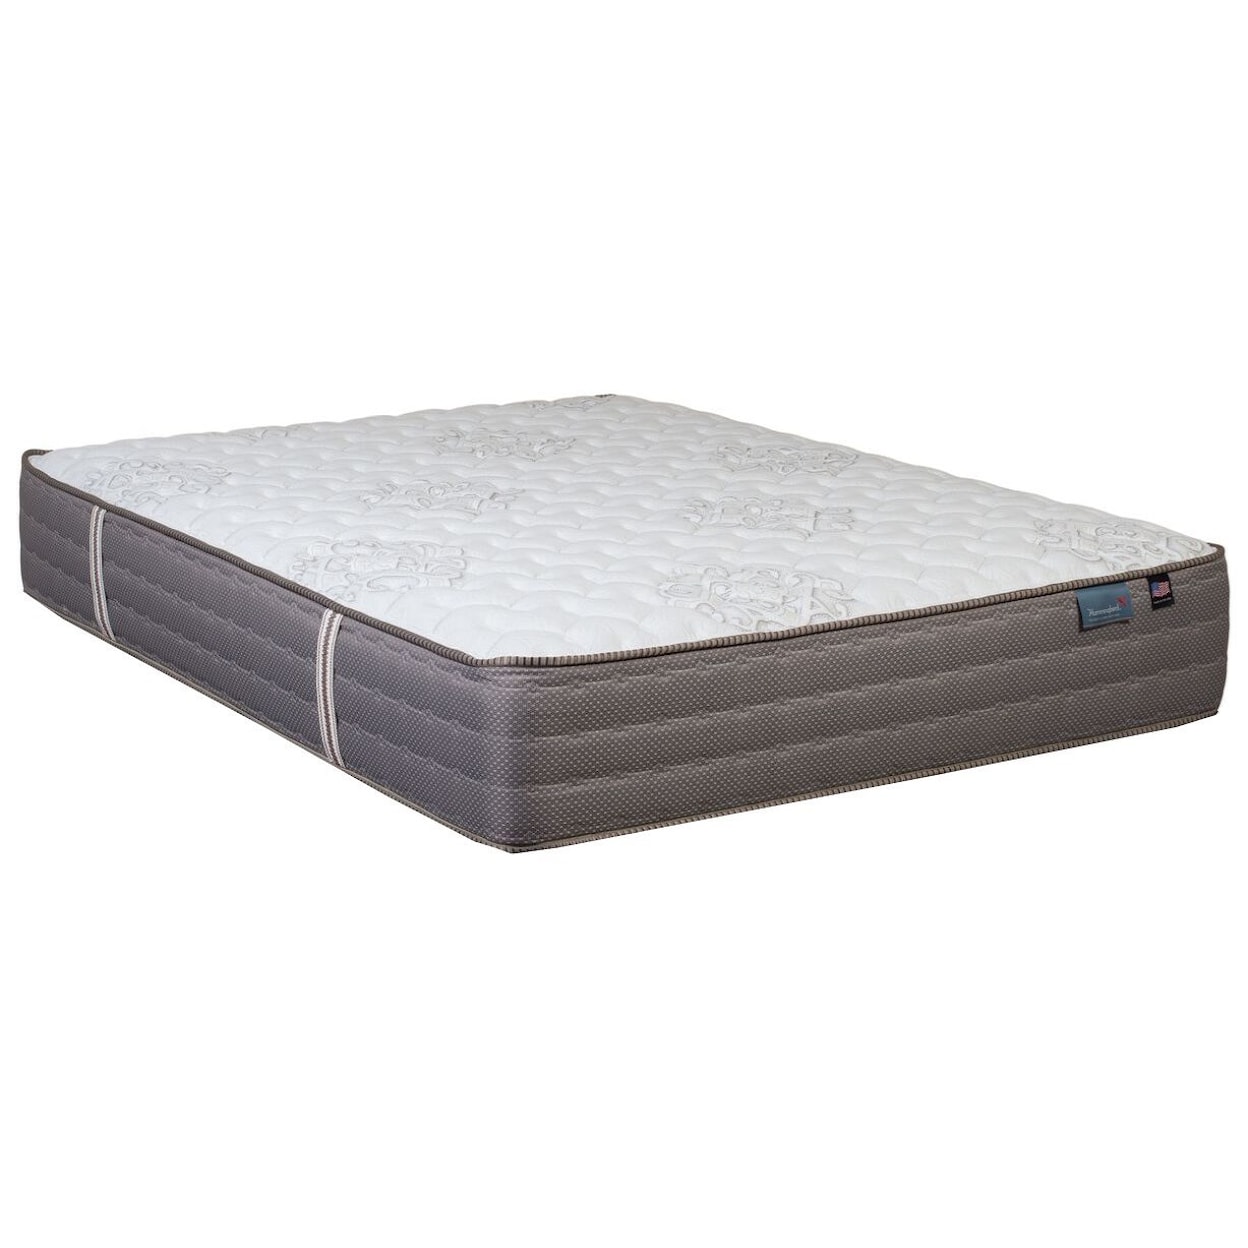 Therapedic Mystic Cloud Firm King Firm Pocketed Coil Mattress